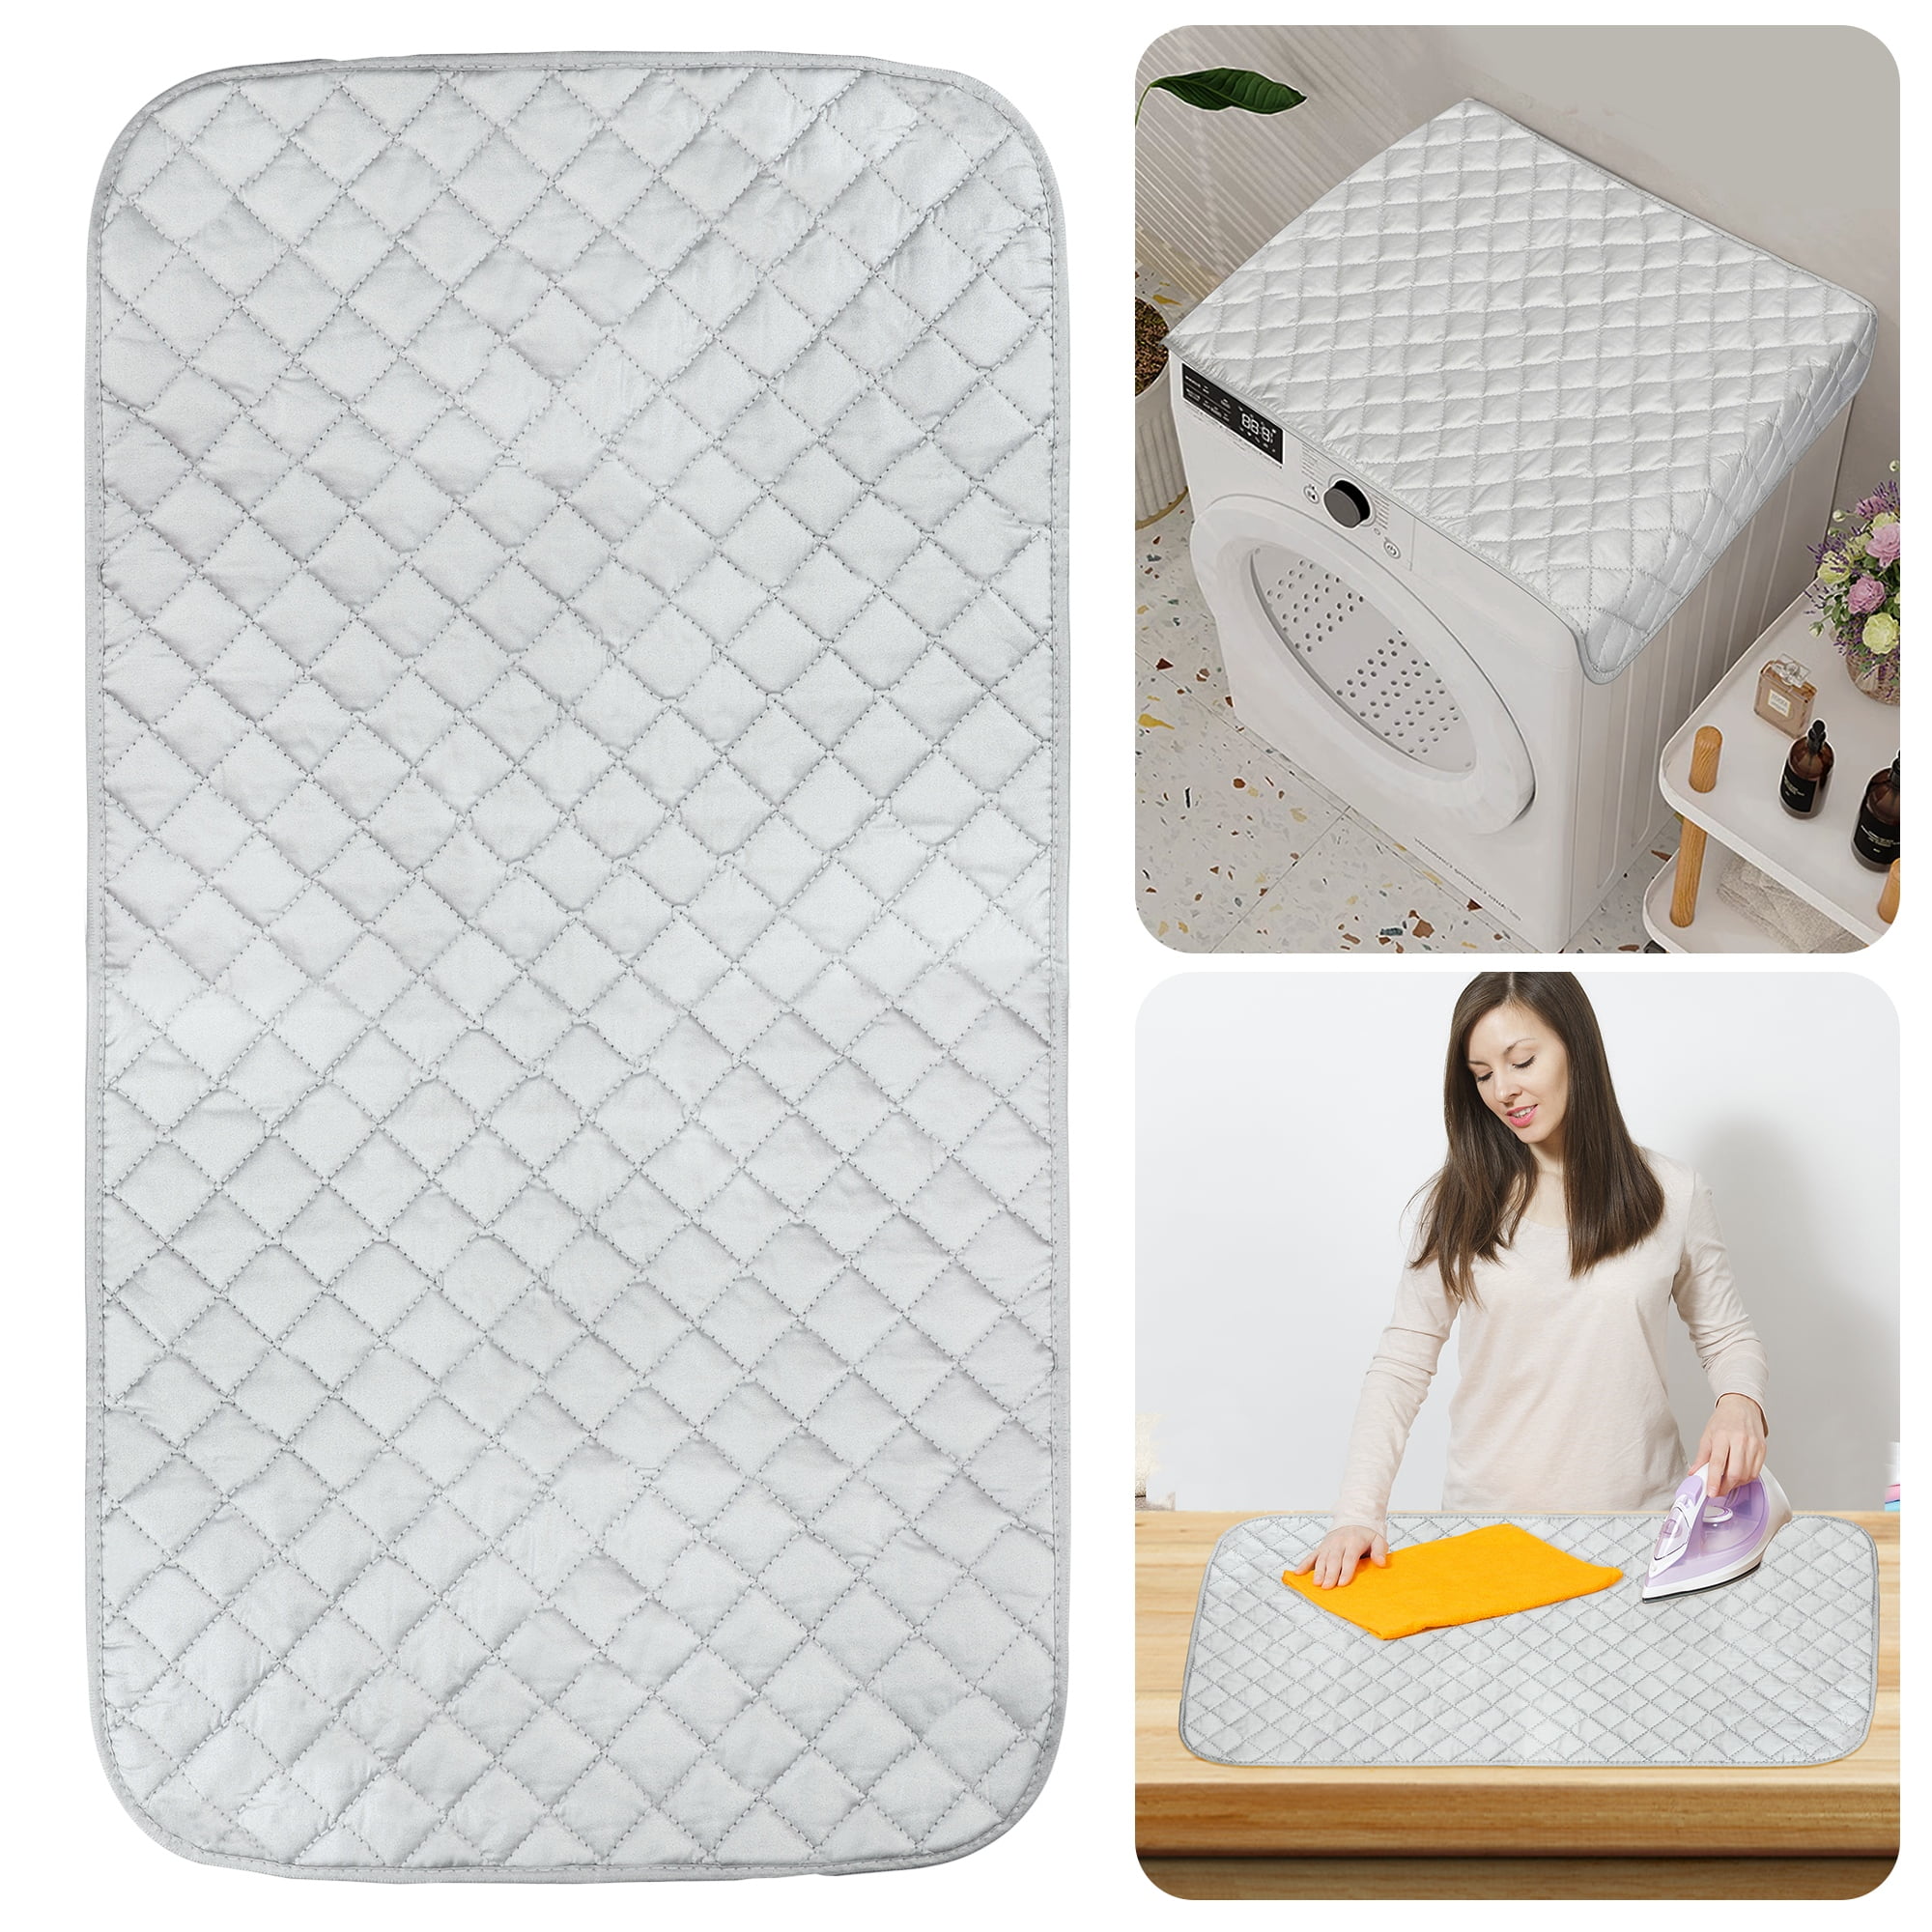  Leopard Texture Ironing Mat for Table Top Portable Ironing  Board Cover Pad Blanket for Travel Washer Dryer Countertop : Home & Kitchen